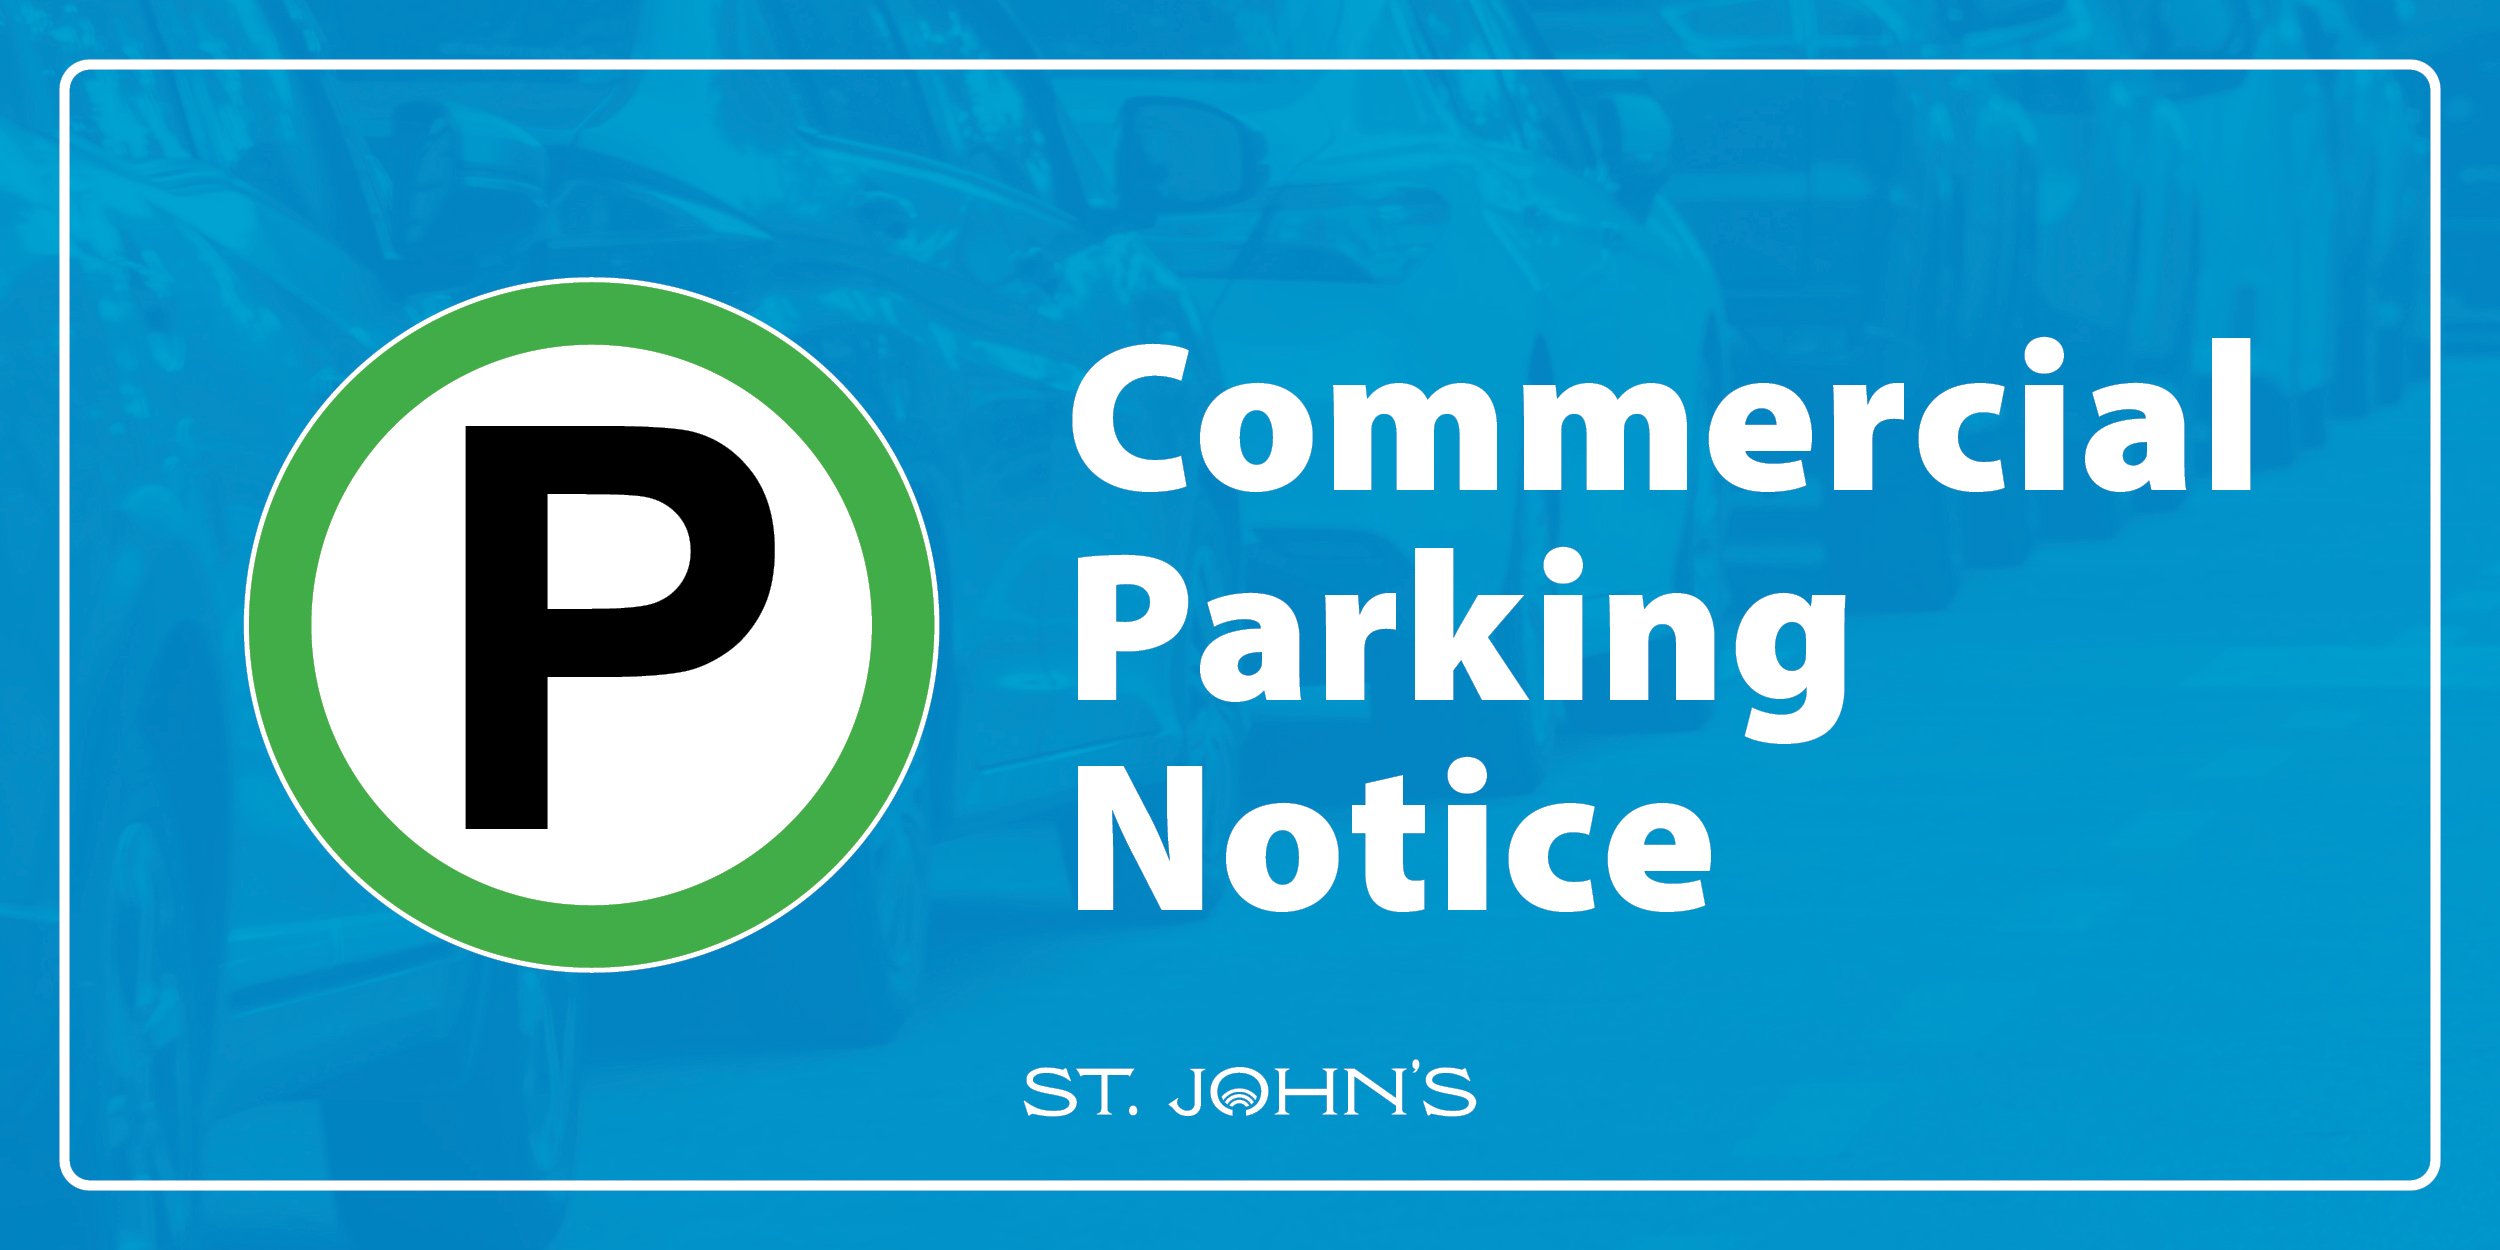 Graphic that says "Commercial Parking Notice"